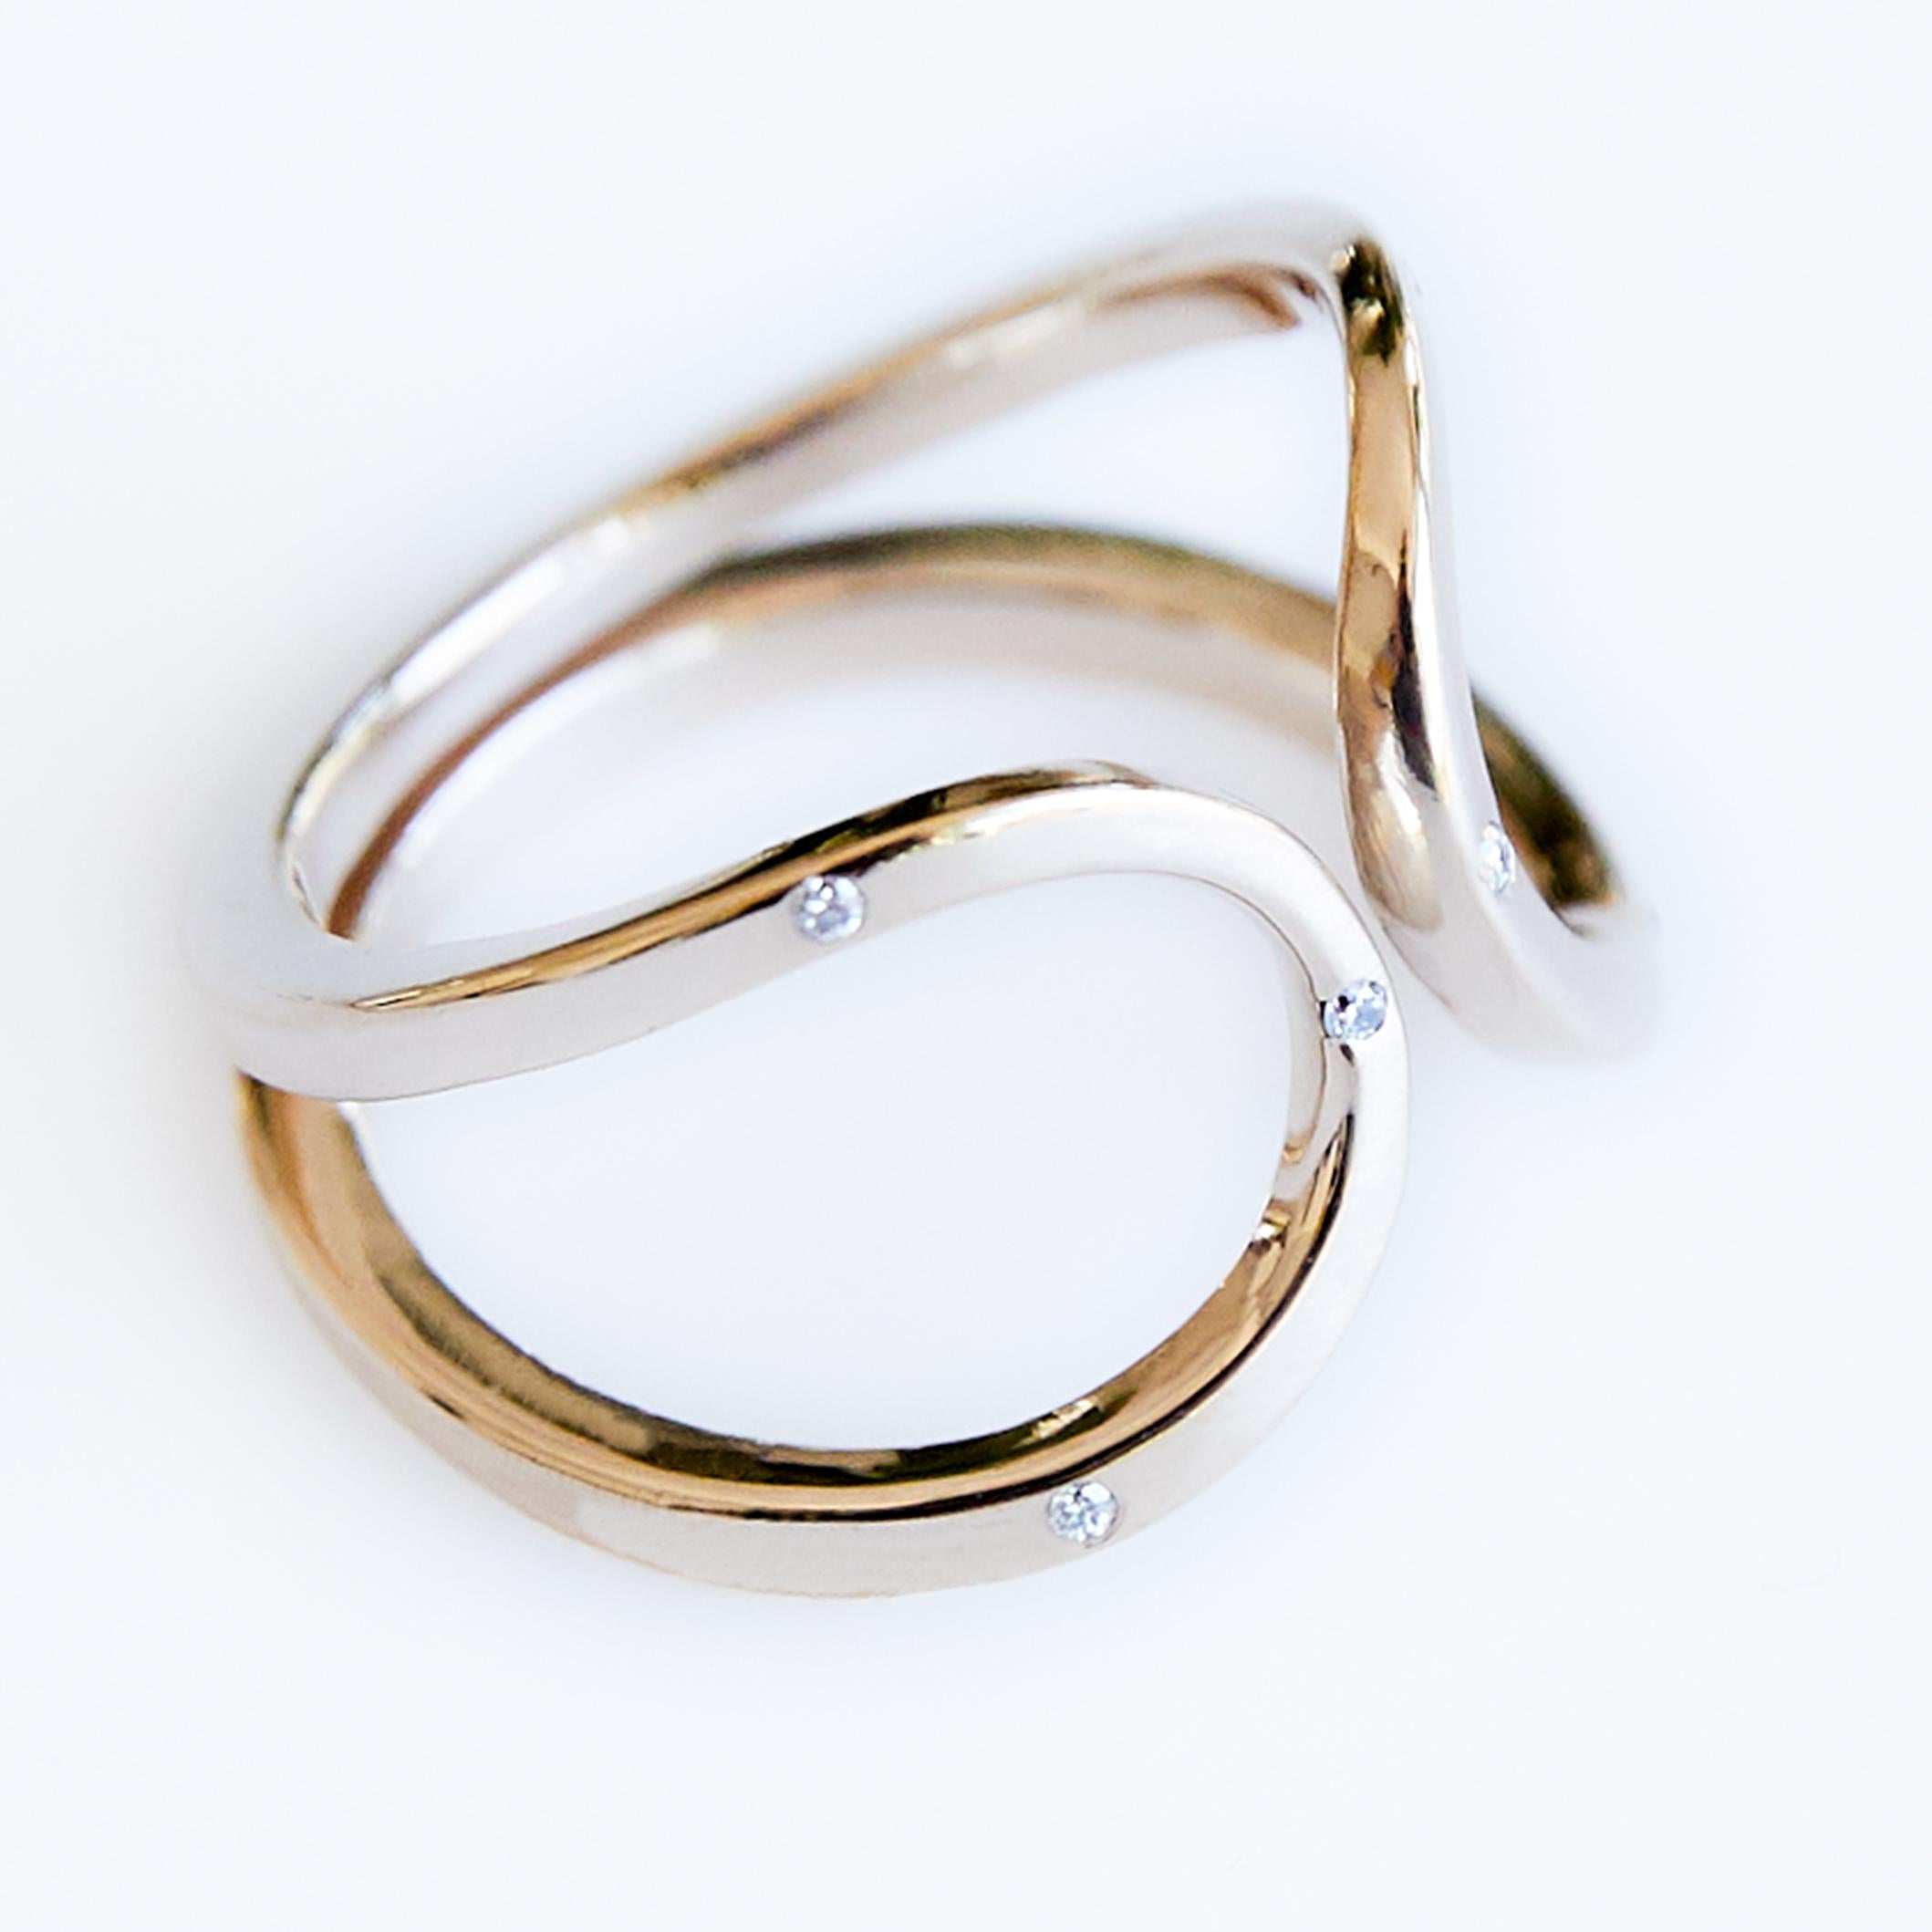 Double Band Ring Gold Vermeil White Diamond Cocktail Ring Adjustable J Dauphin

J DAUPHIN 